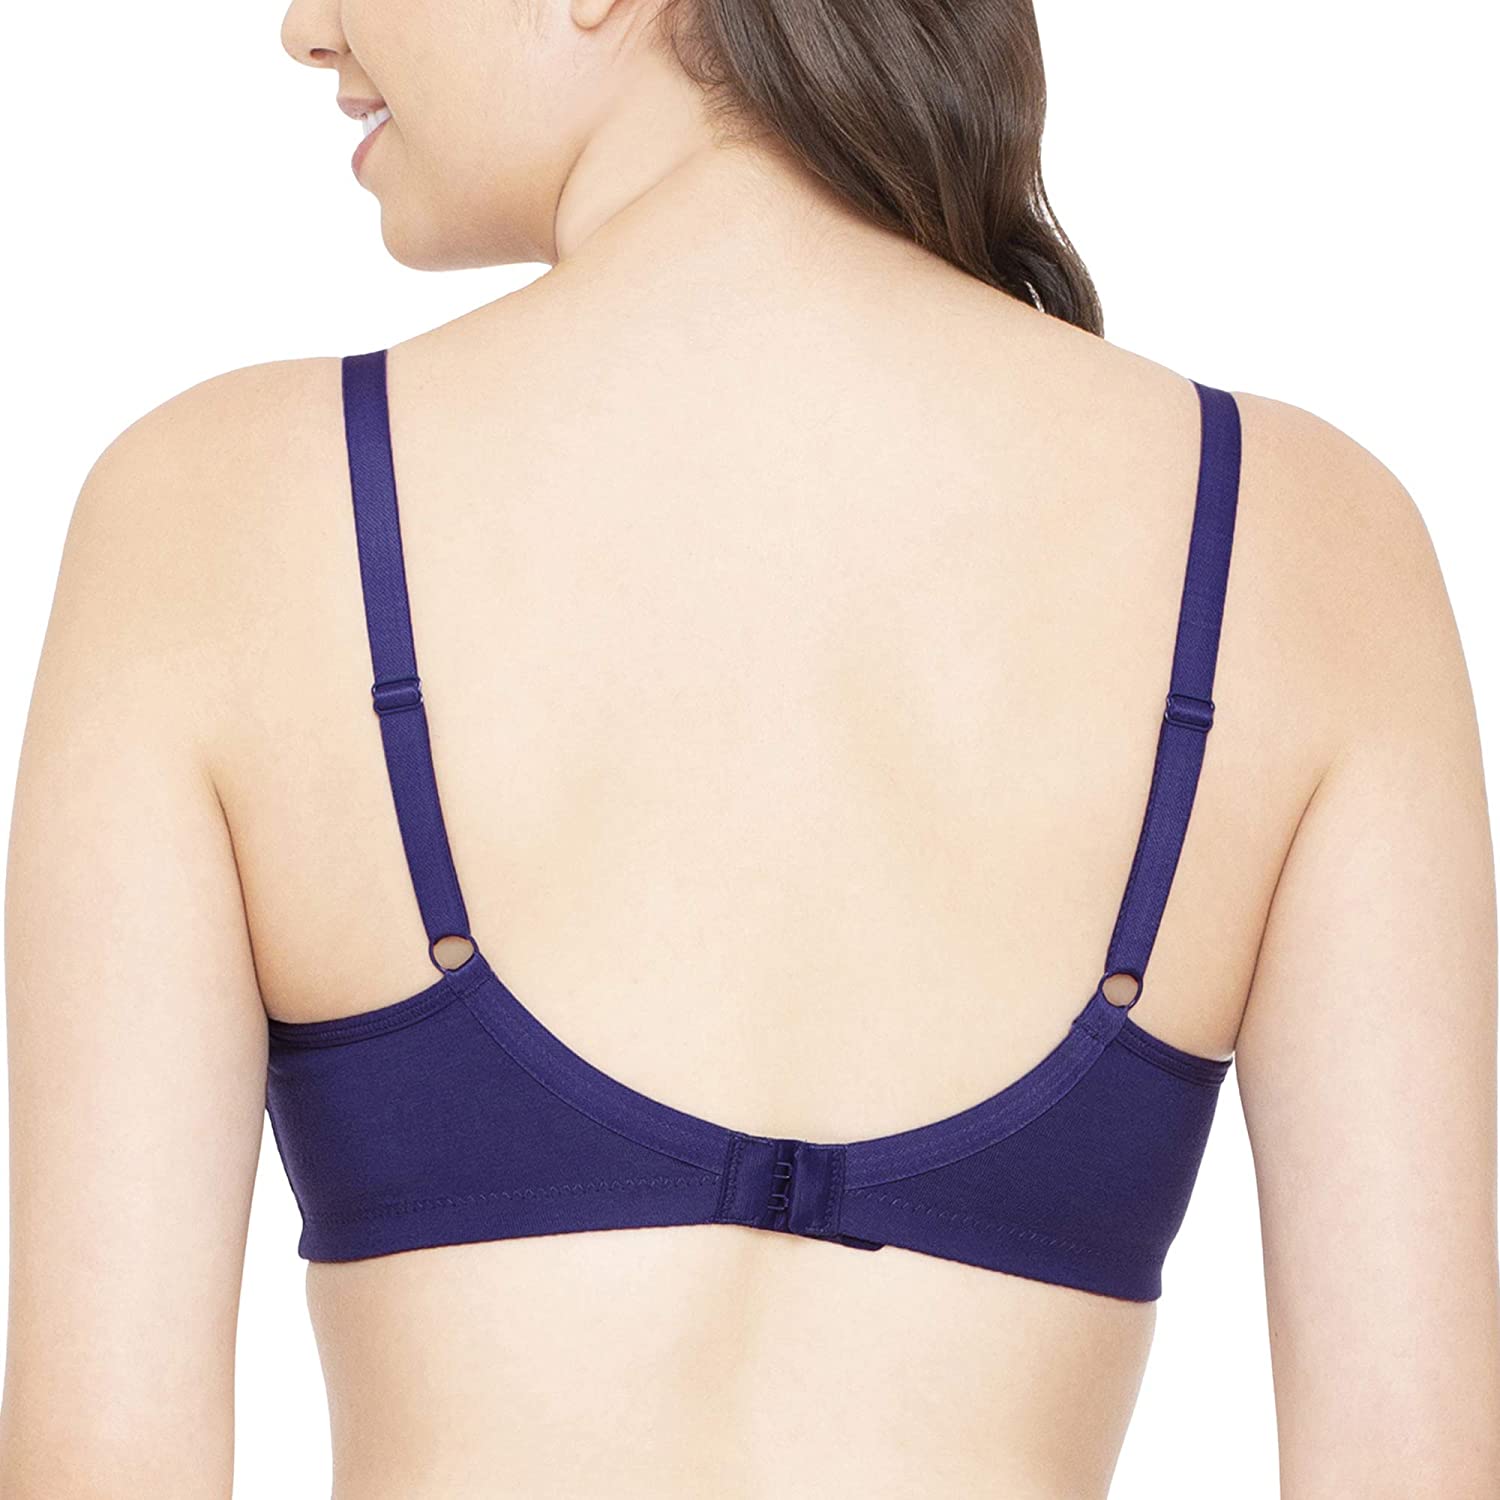 Buy Enamor A072 Stay New Comfort Triangle Cotton T-shirt Bra for